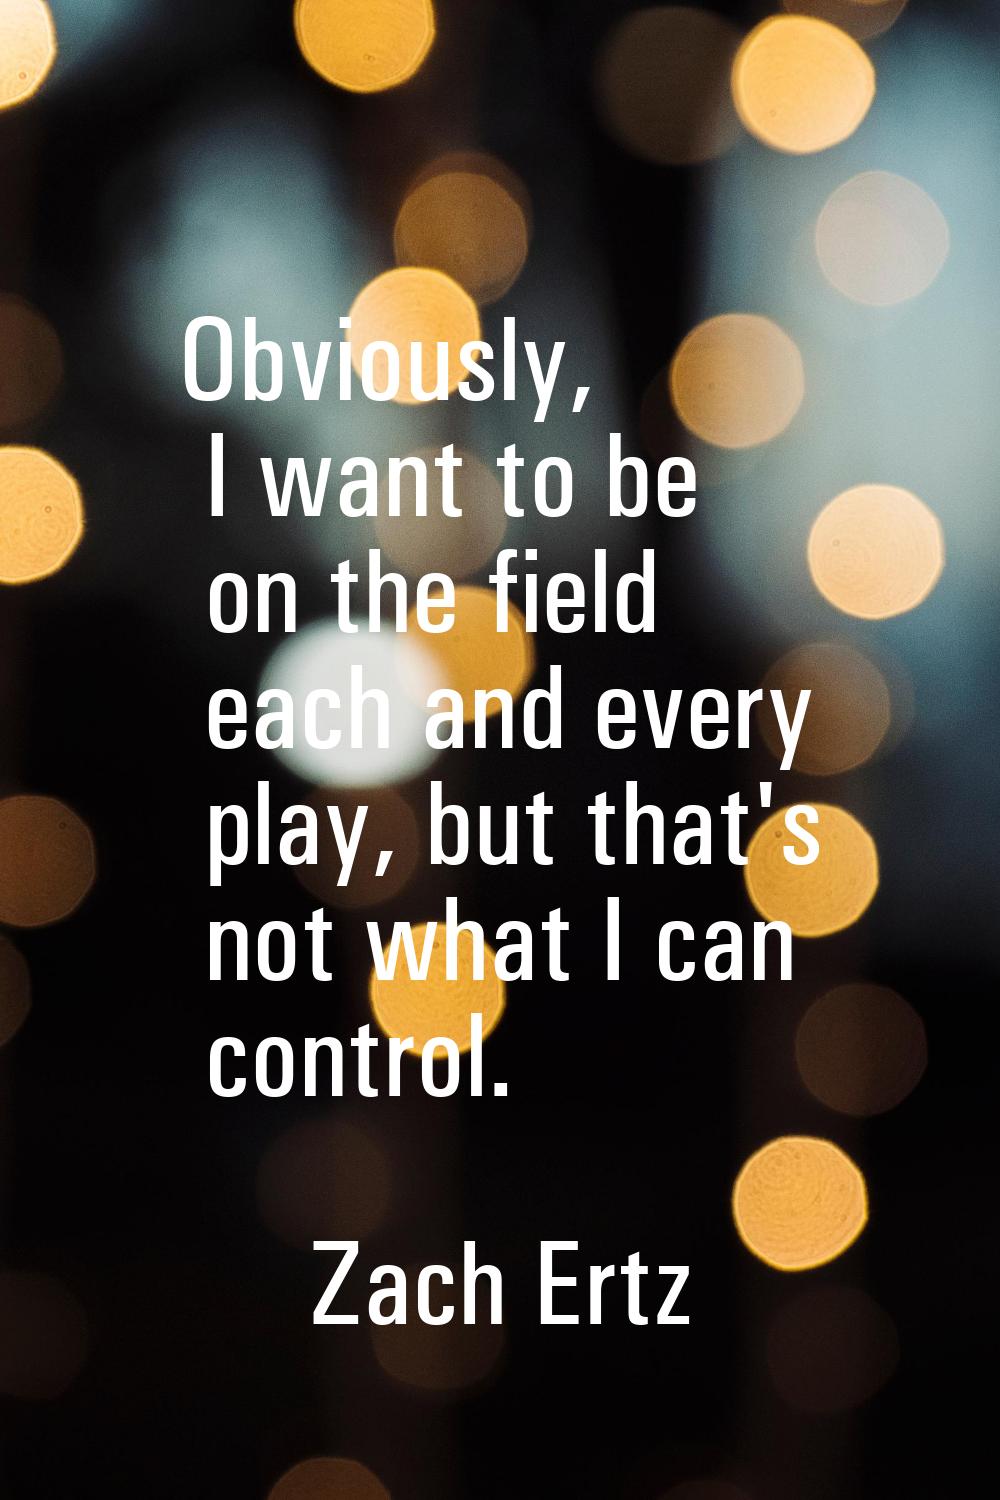 Obviously, I want to be on the field each and every play, but that's not what I can control.